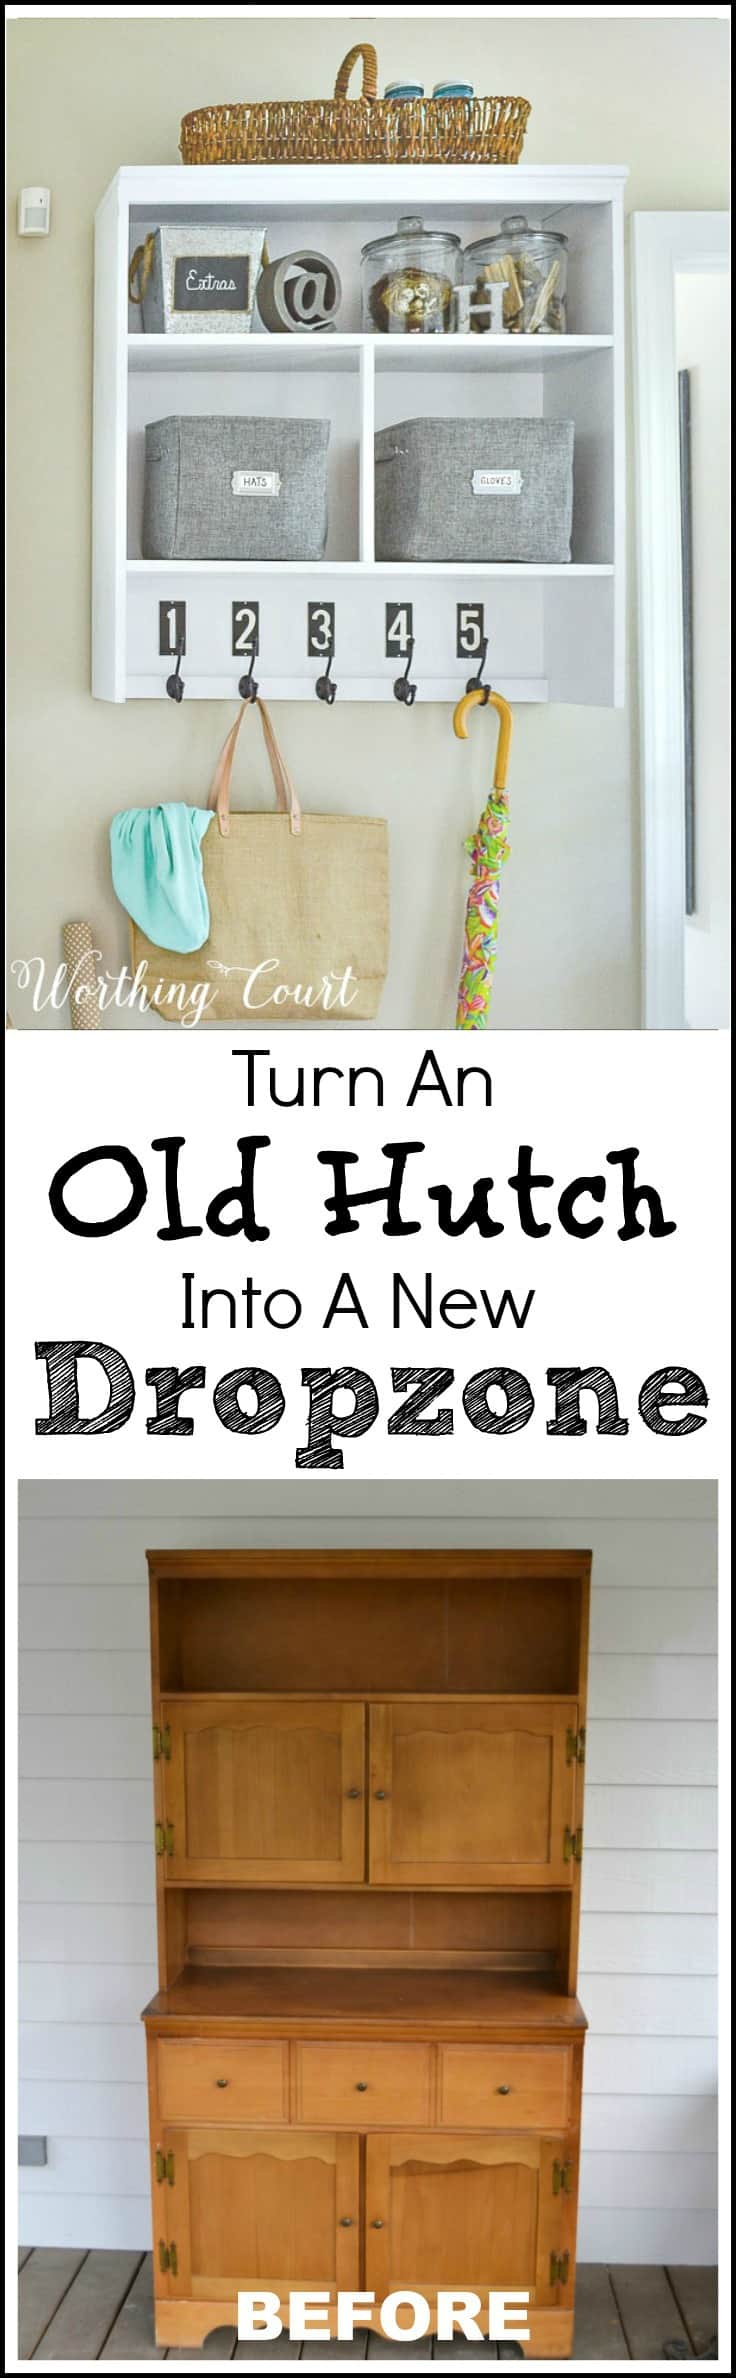 What To Do When There's No Space For A Mudroom || Worthing Court